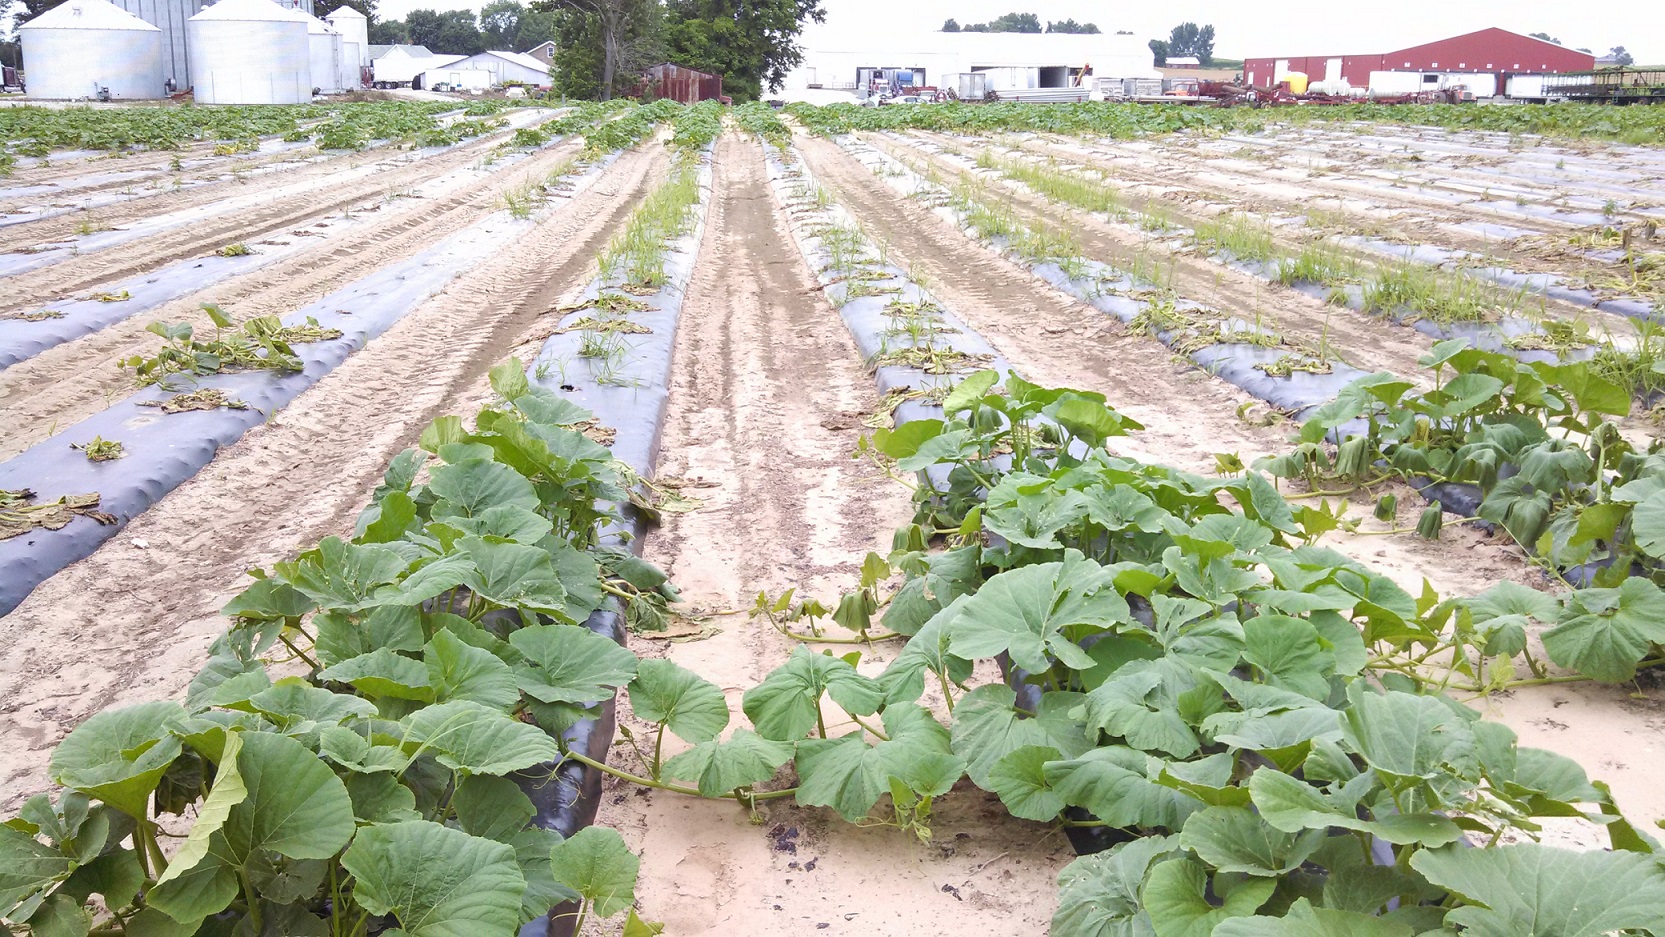 Phytophthora blight has affected the pumpkin plants in the lower area of this field.